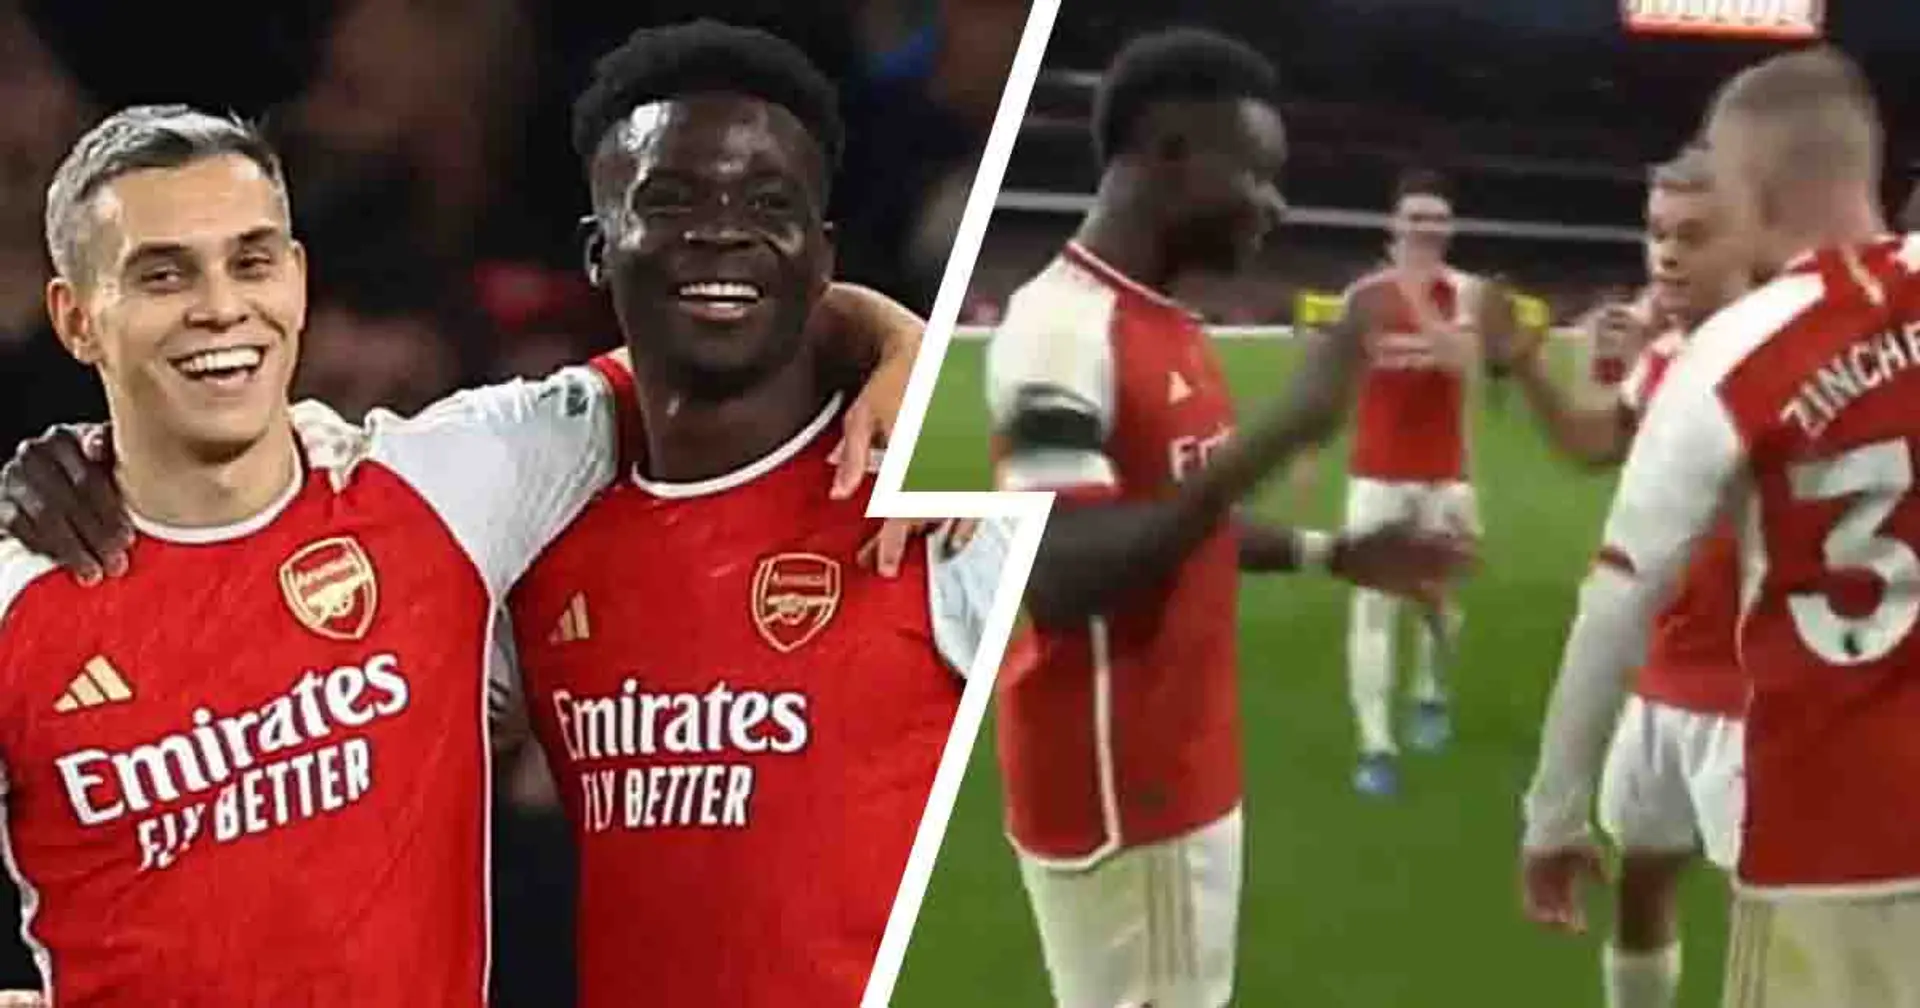 'Love the energy': Arsenal fans love new celebration debuted by Saka and Trossard